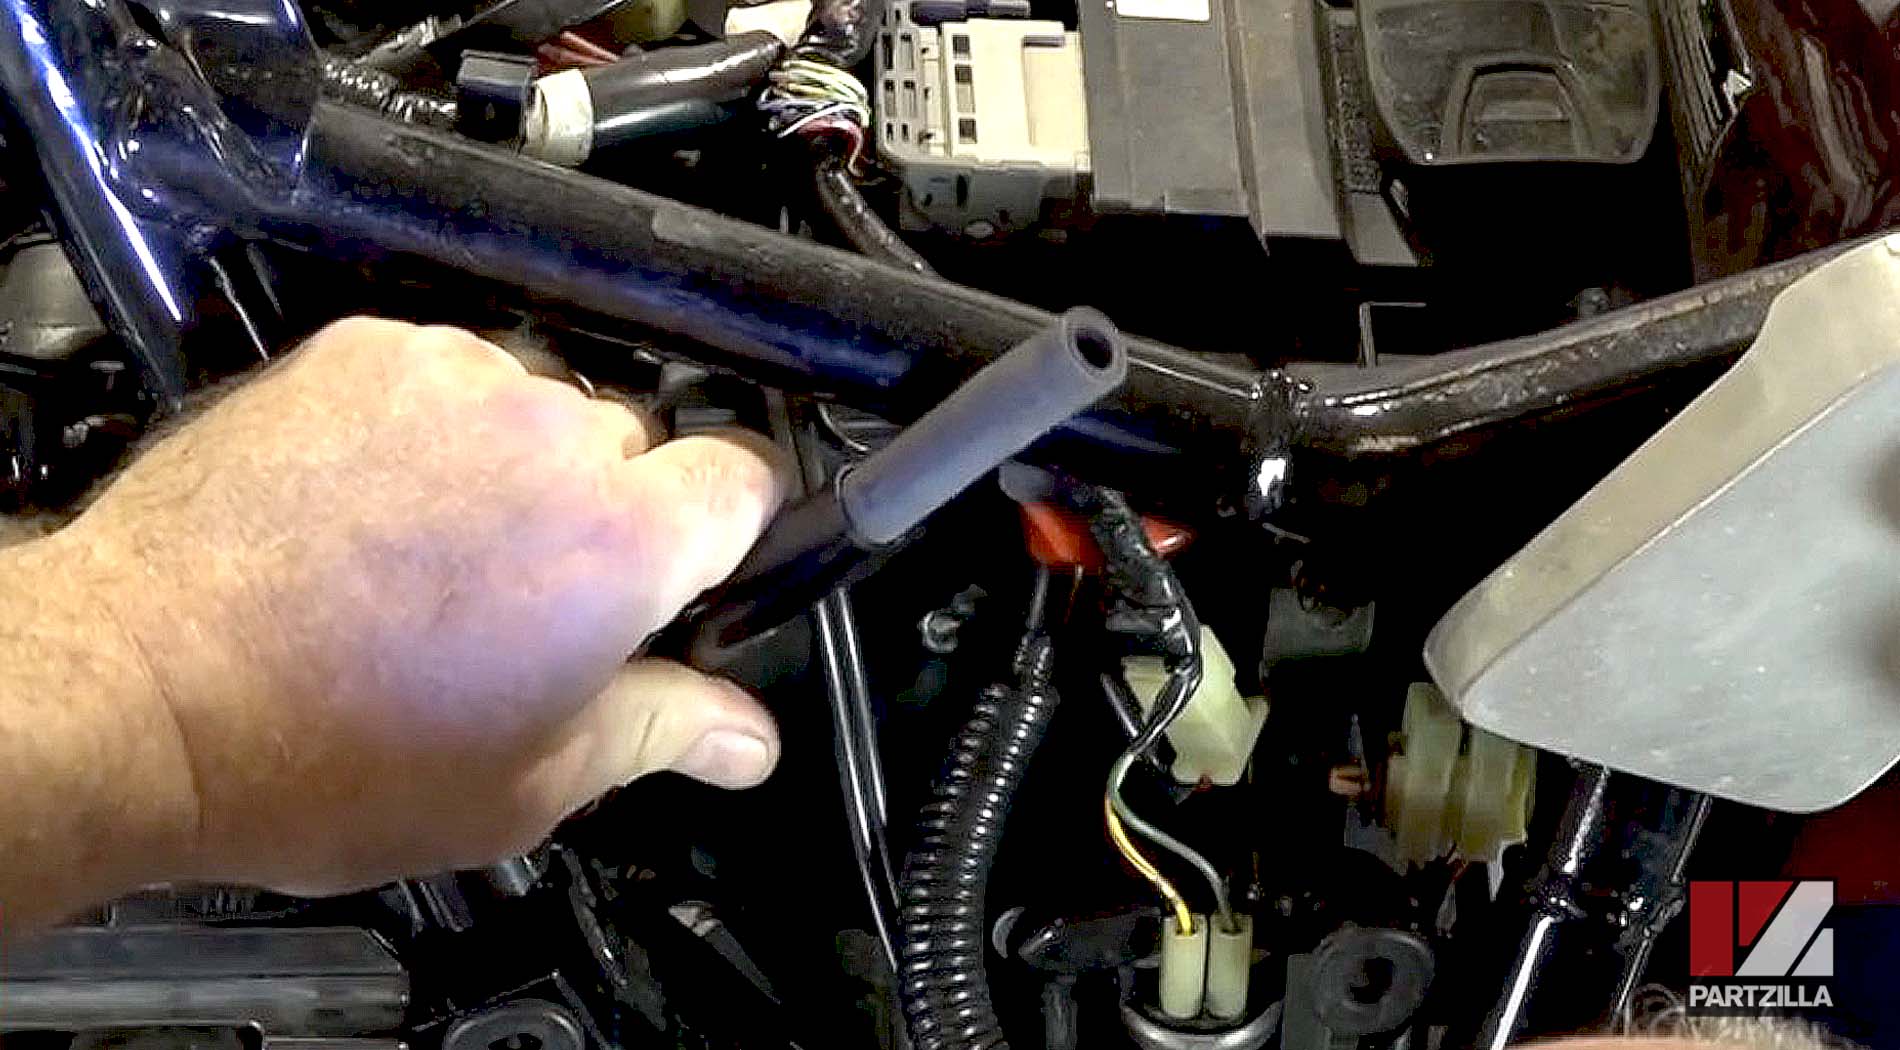 How to replace 2005 Honda VTX motorcycle fuel line